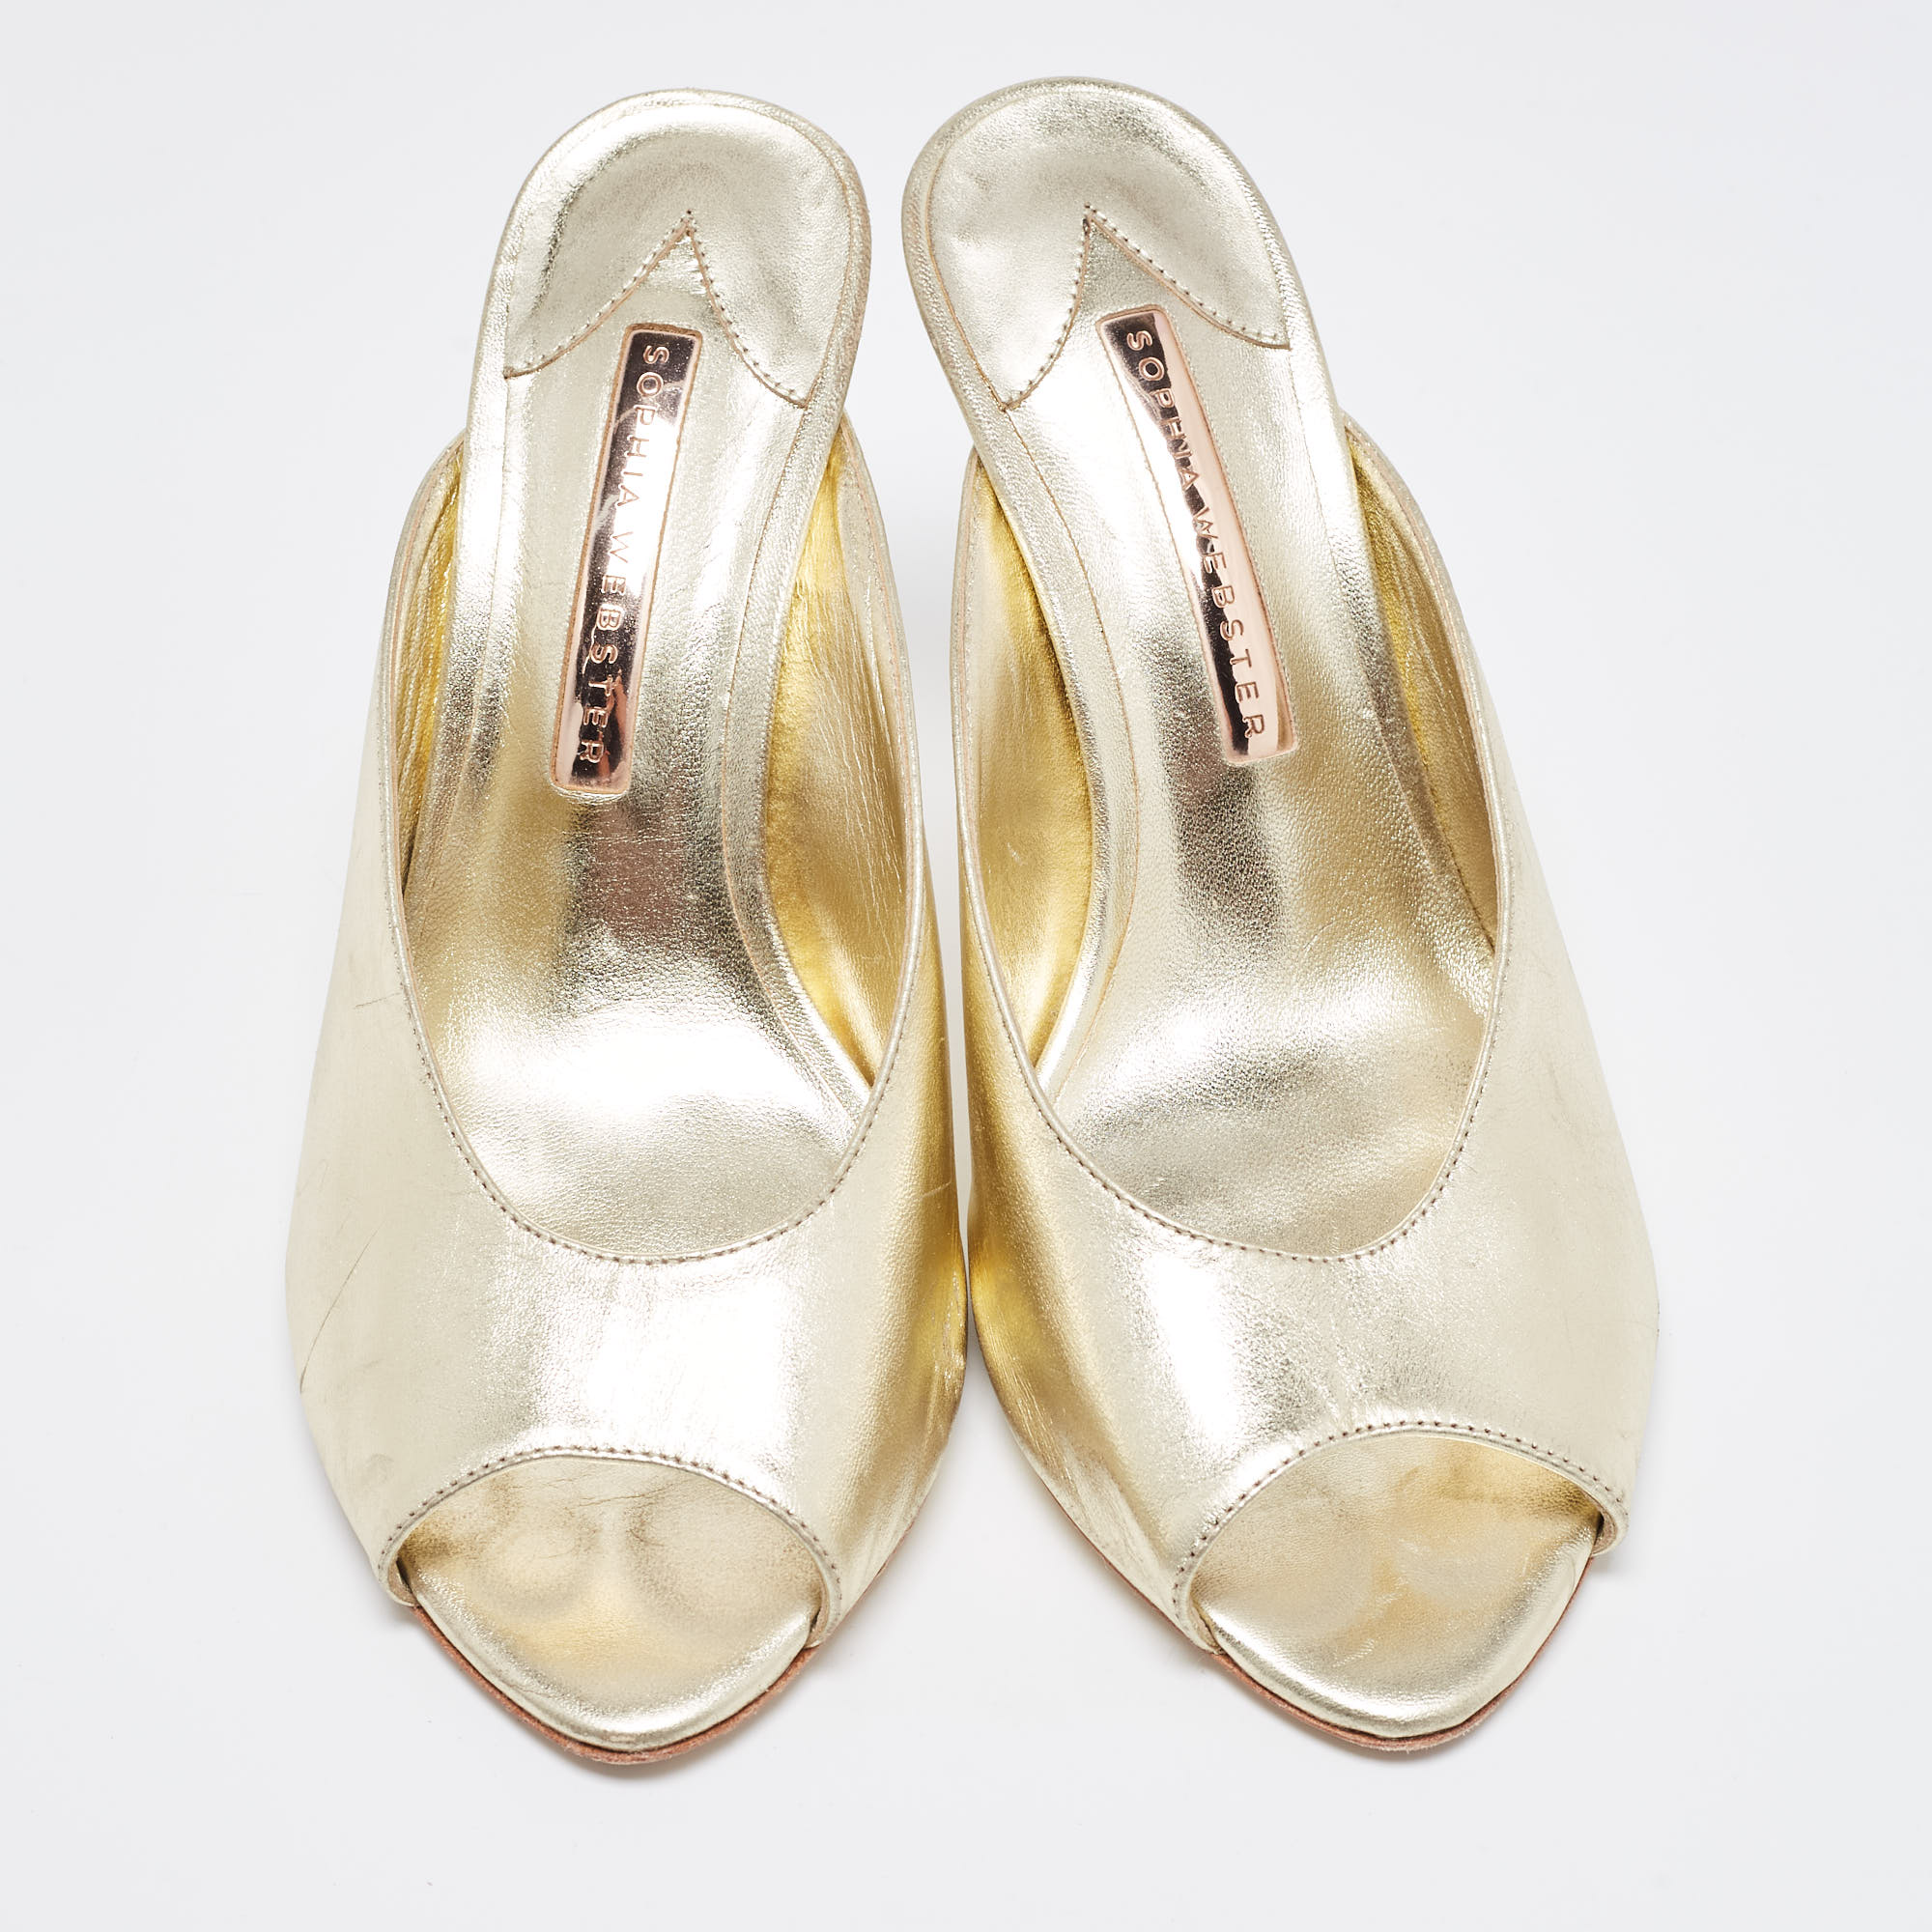 Sophia Webster Metallic Gold Leather Mules Size 38.5